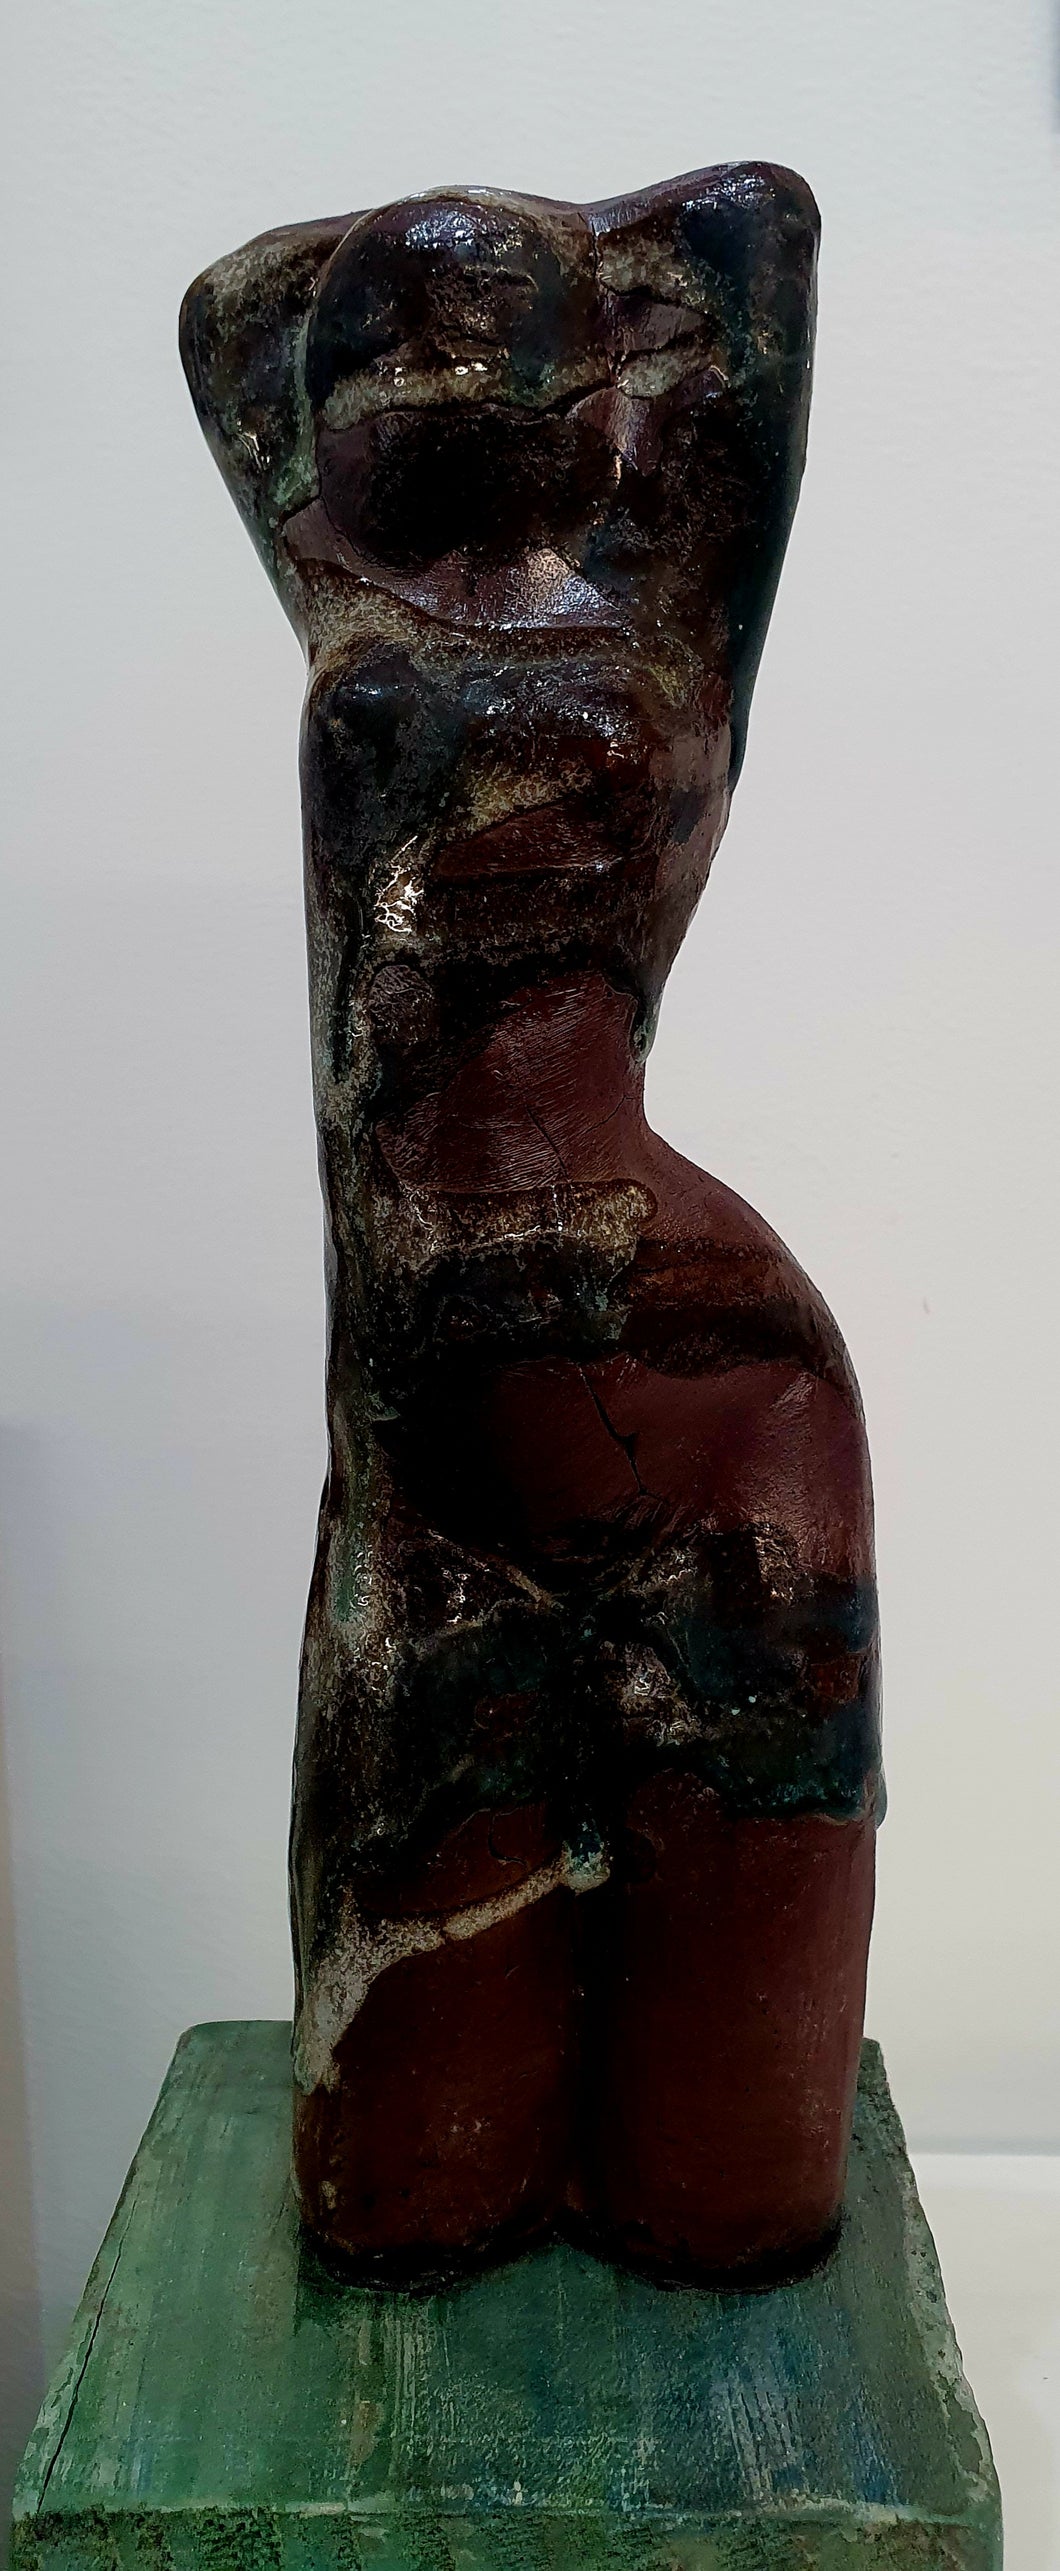 Figurative Sculpture LaLa by Sophie Howard